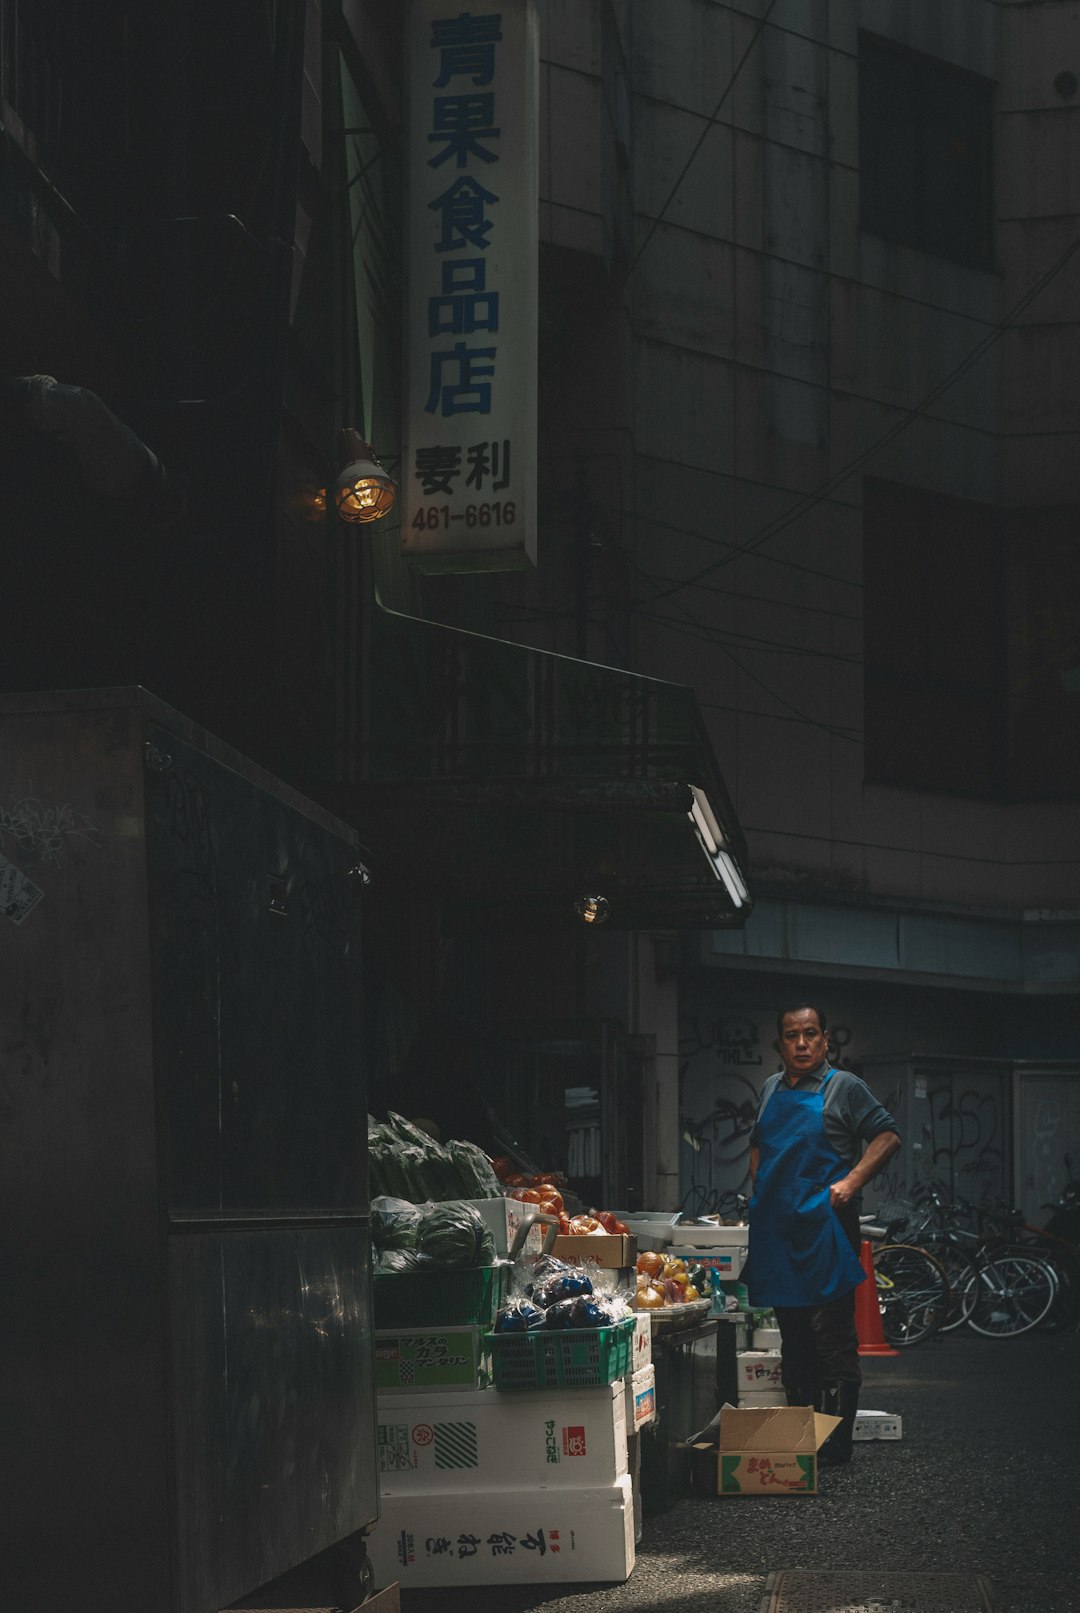 man in red t-shirt and blue denim jeans standing near food stall during nighttime